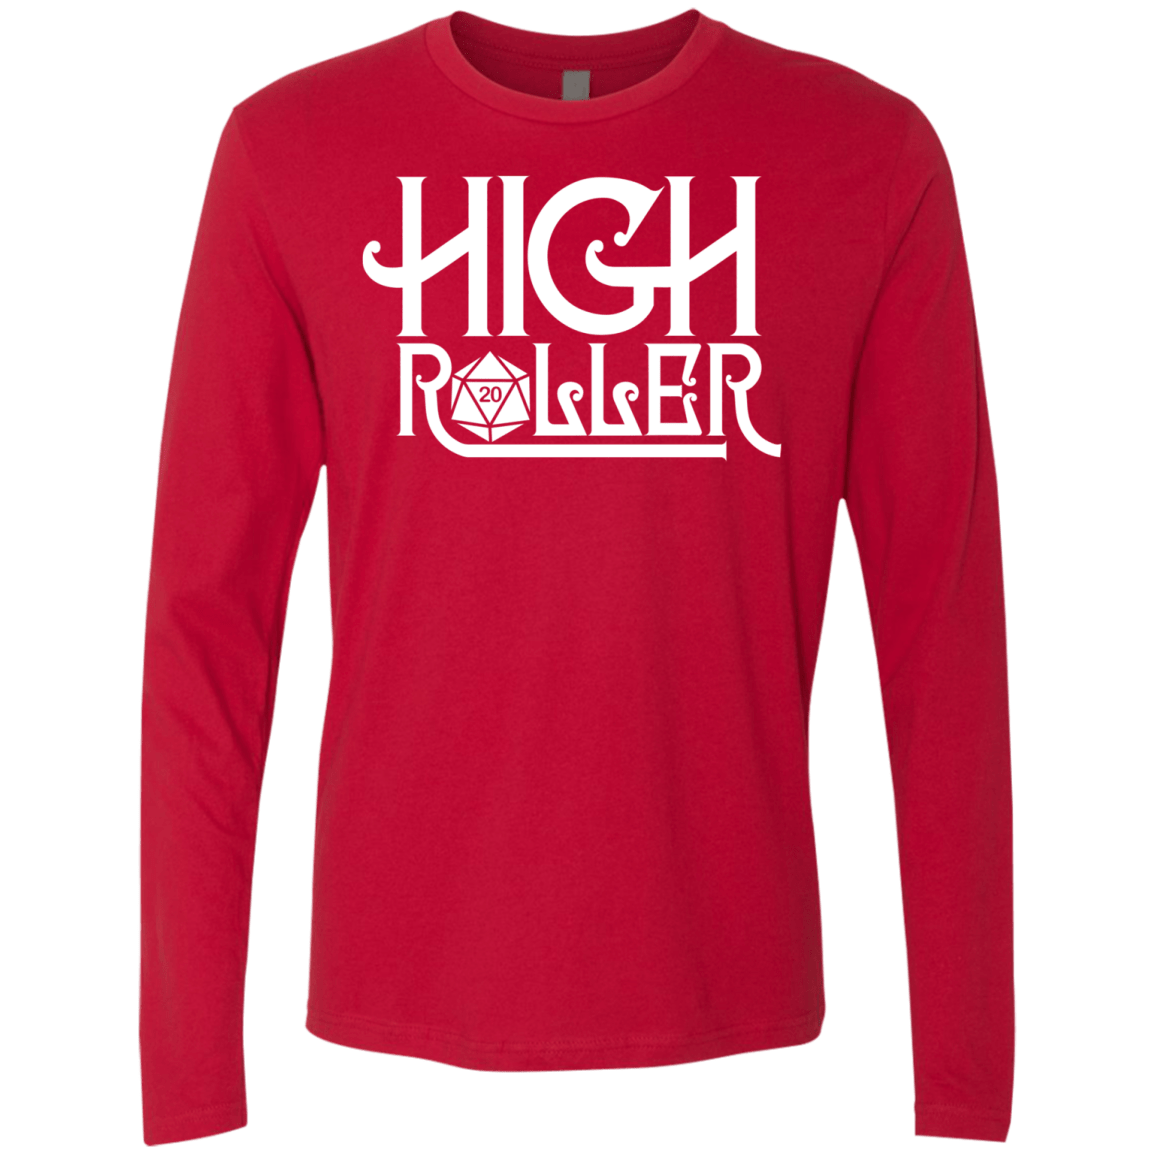 T-Shirts Red / Small High Roller Men's Premium Long Sleeve